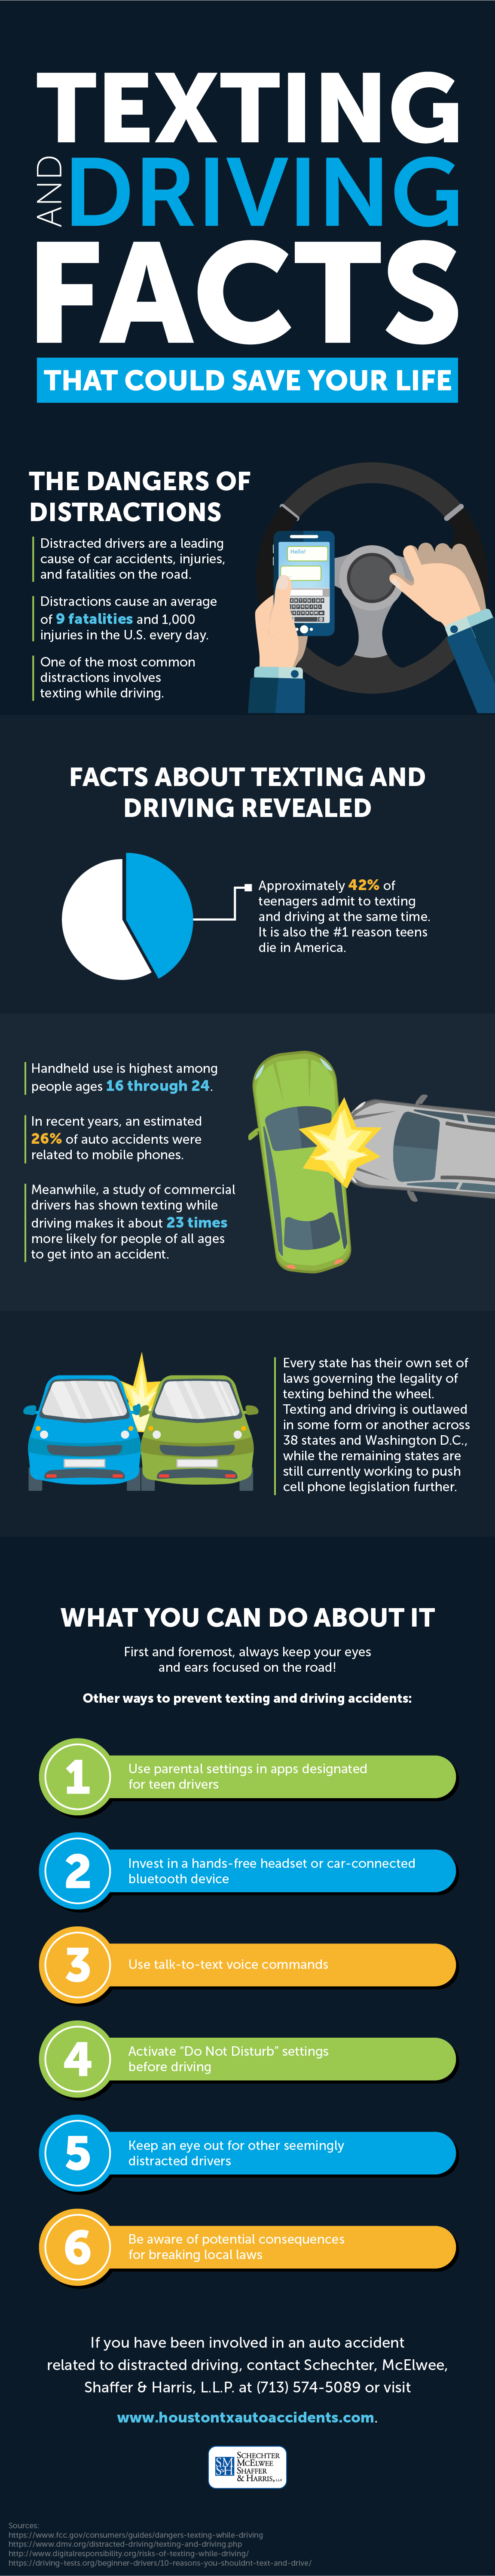 Texting and Driving Facts